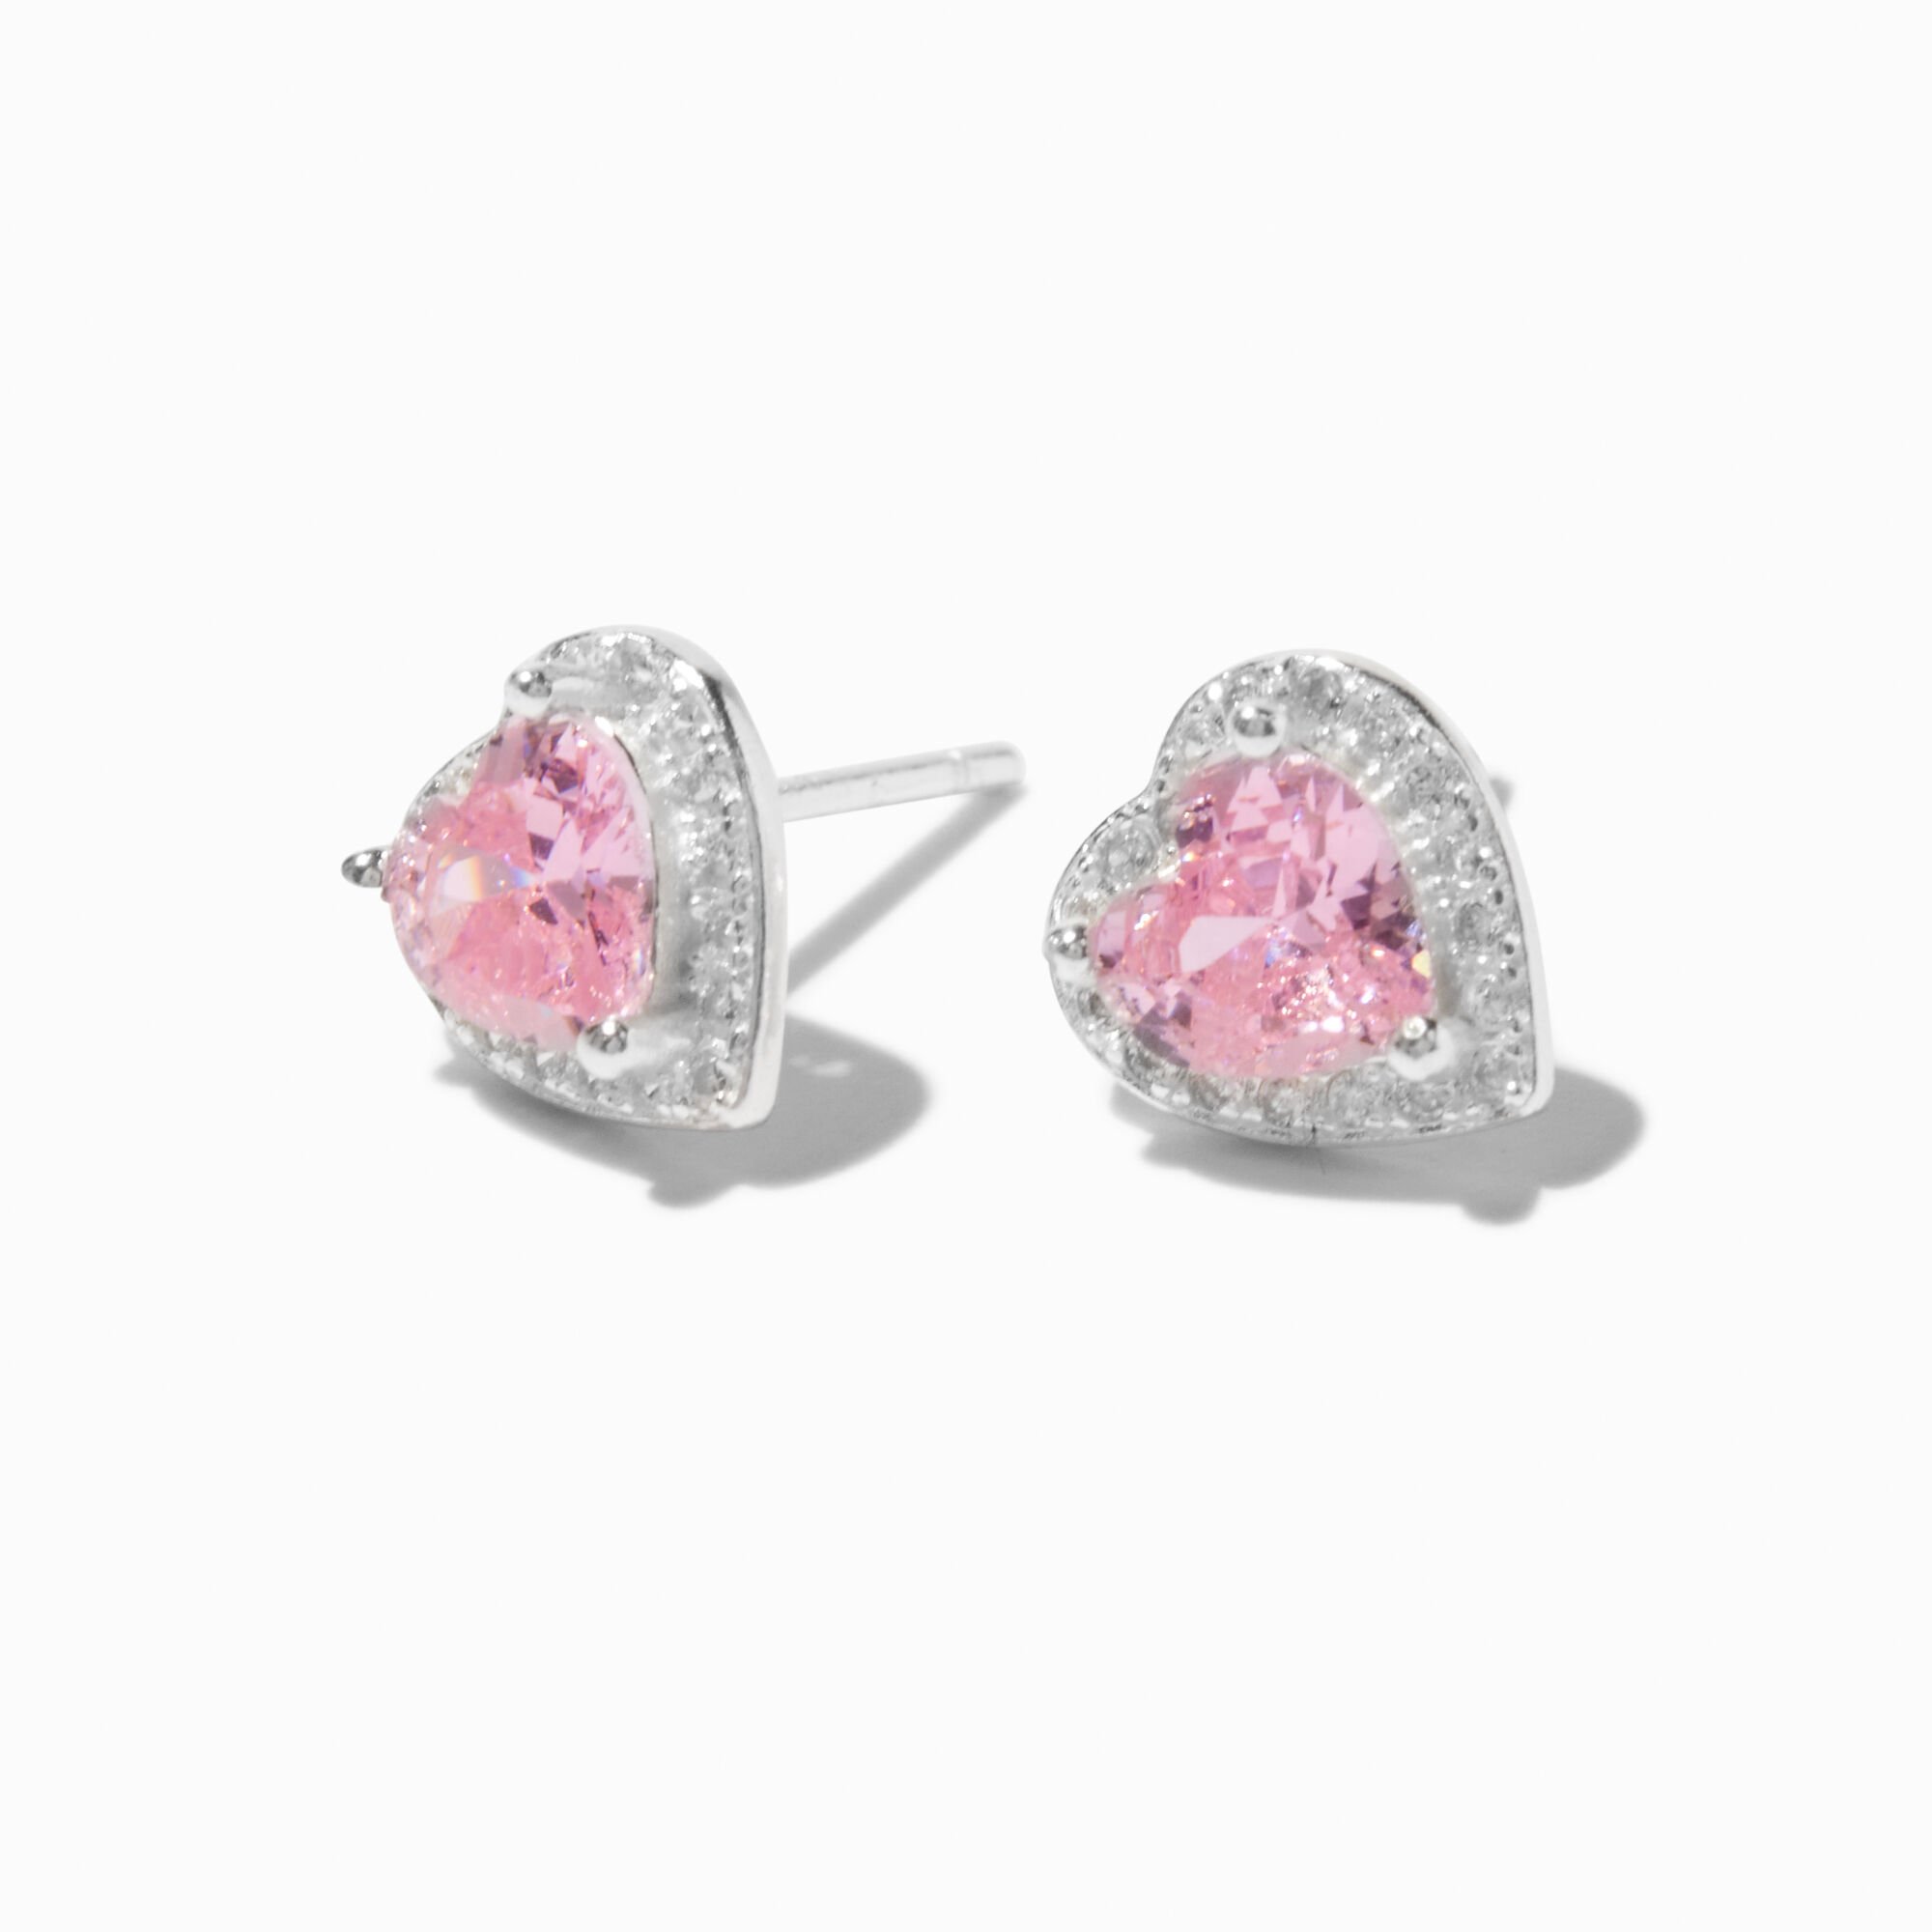 View Claires Sterling Silver Halo Heart Stud Earrings Pink information